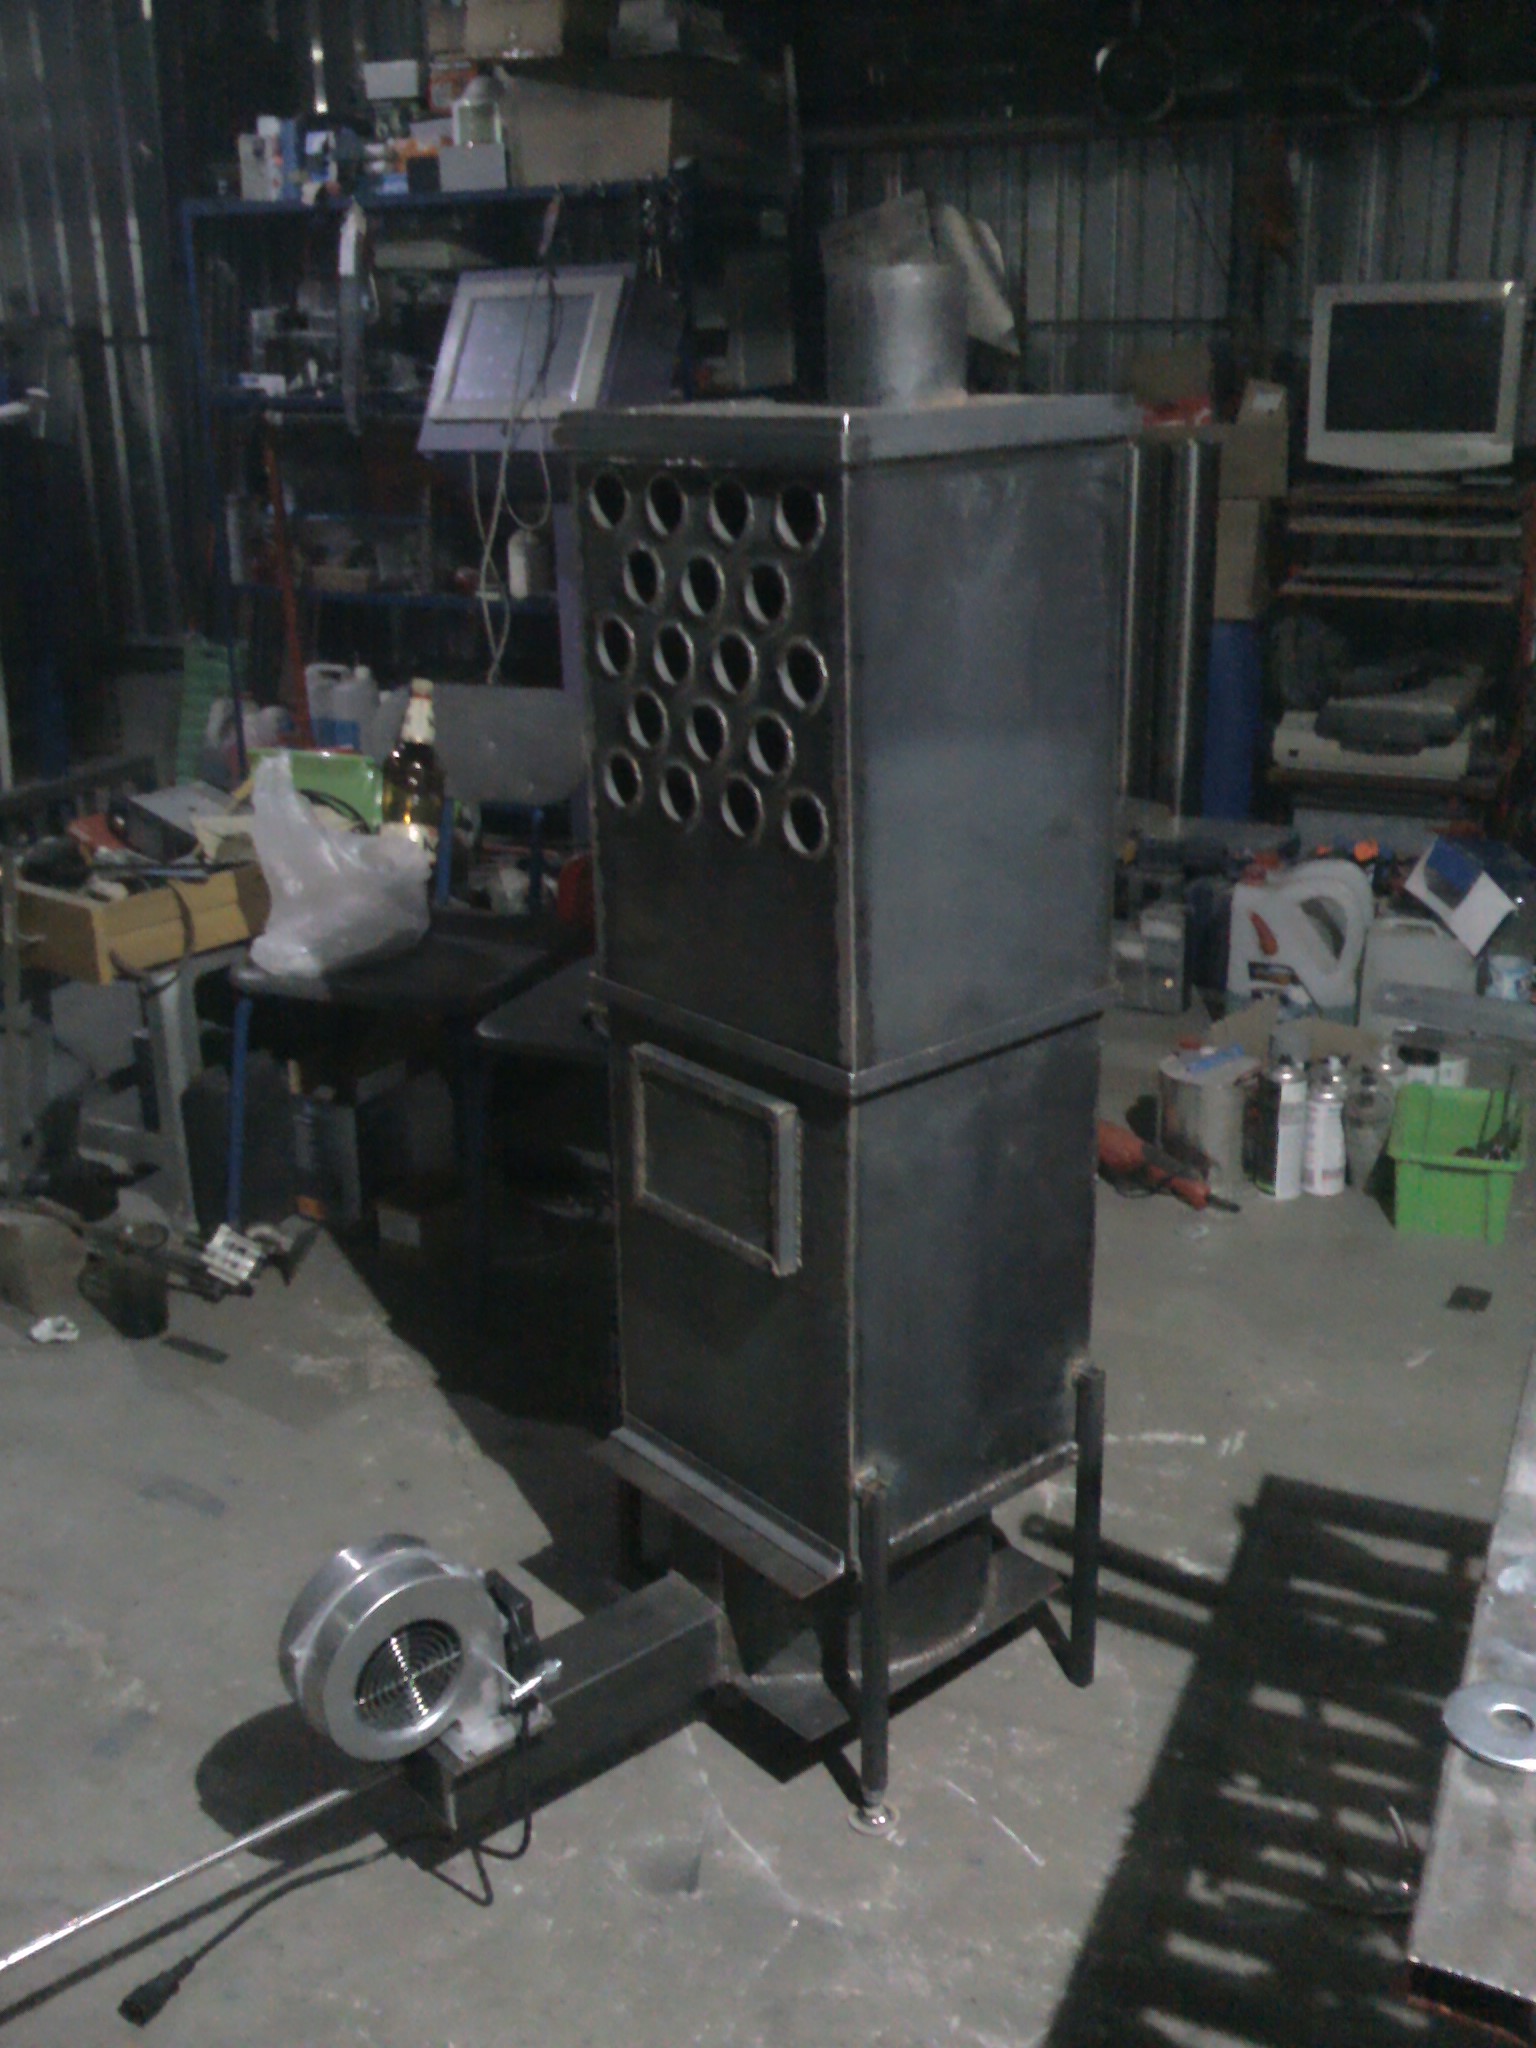 my waste oil stove